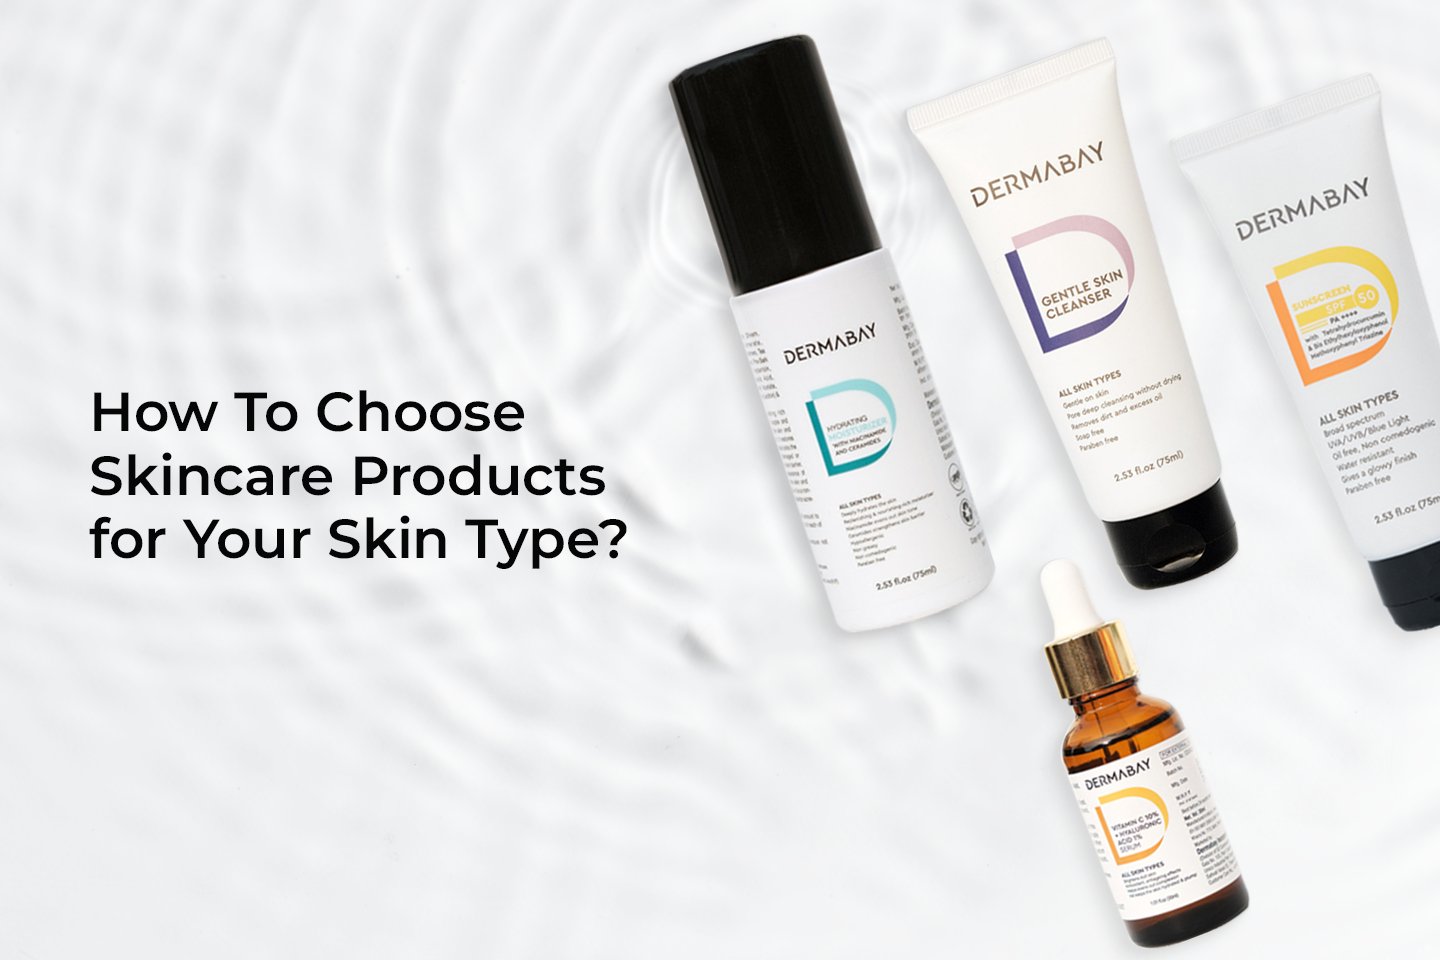 How To Choose Skincare Products for Your Skin Type? - Dermabay